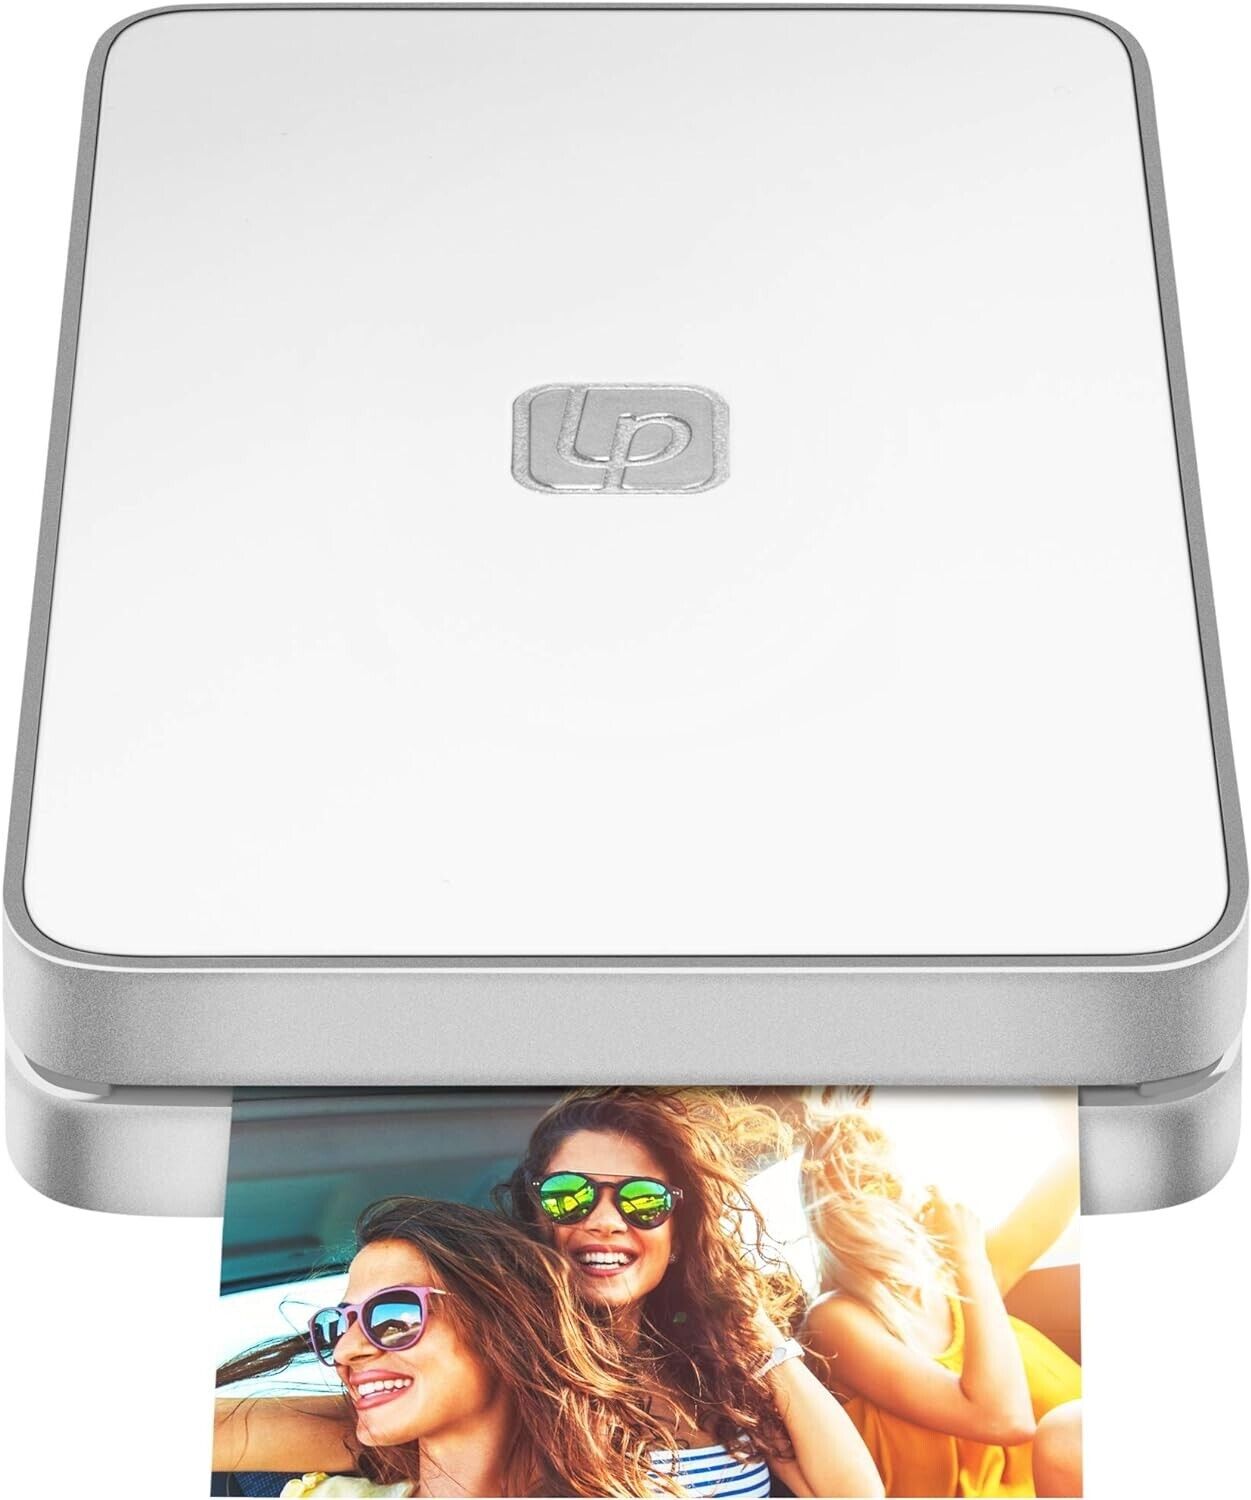 LifePrint 2x3 Portable Printer for iPhone and Android, White